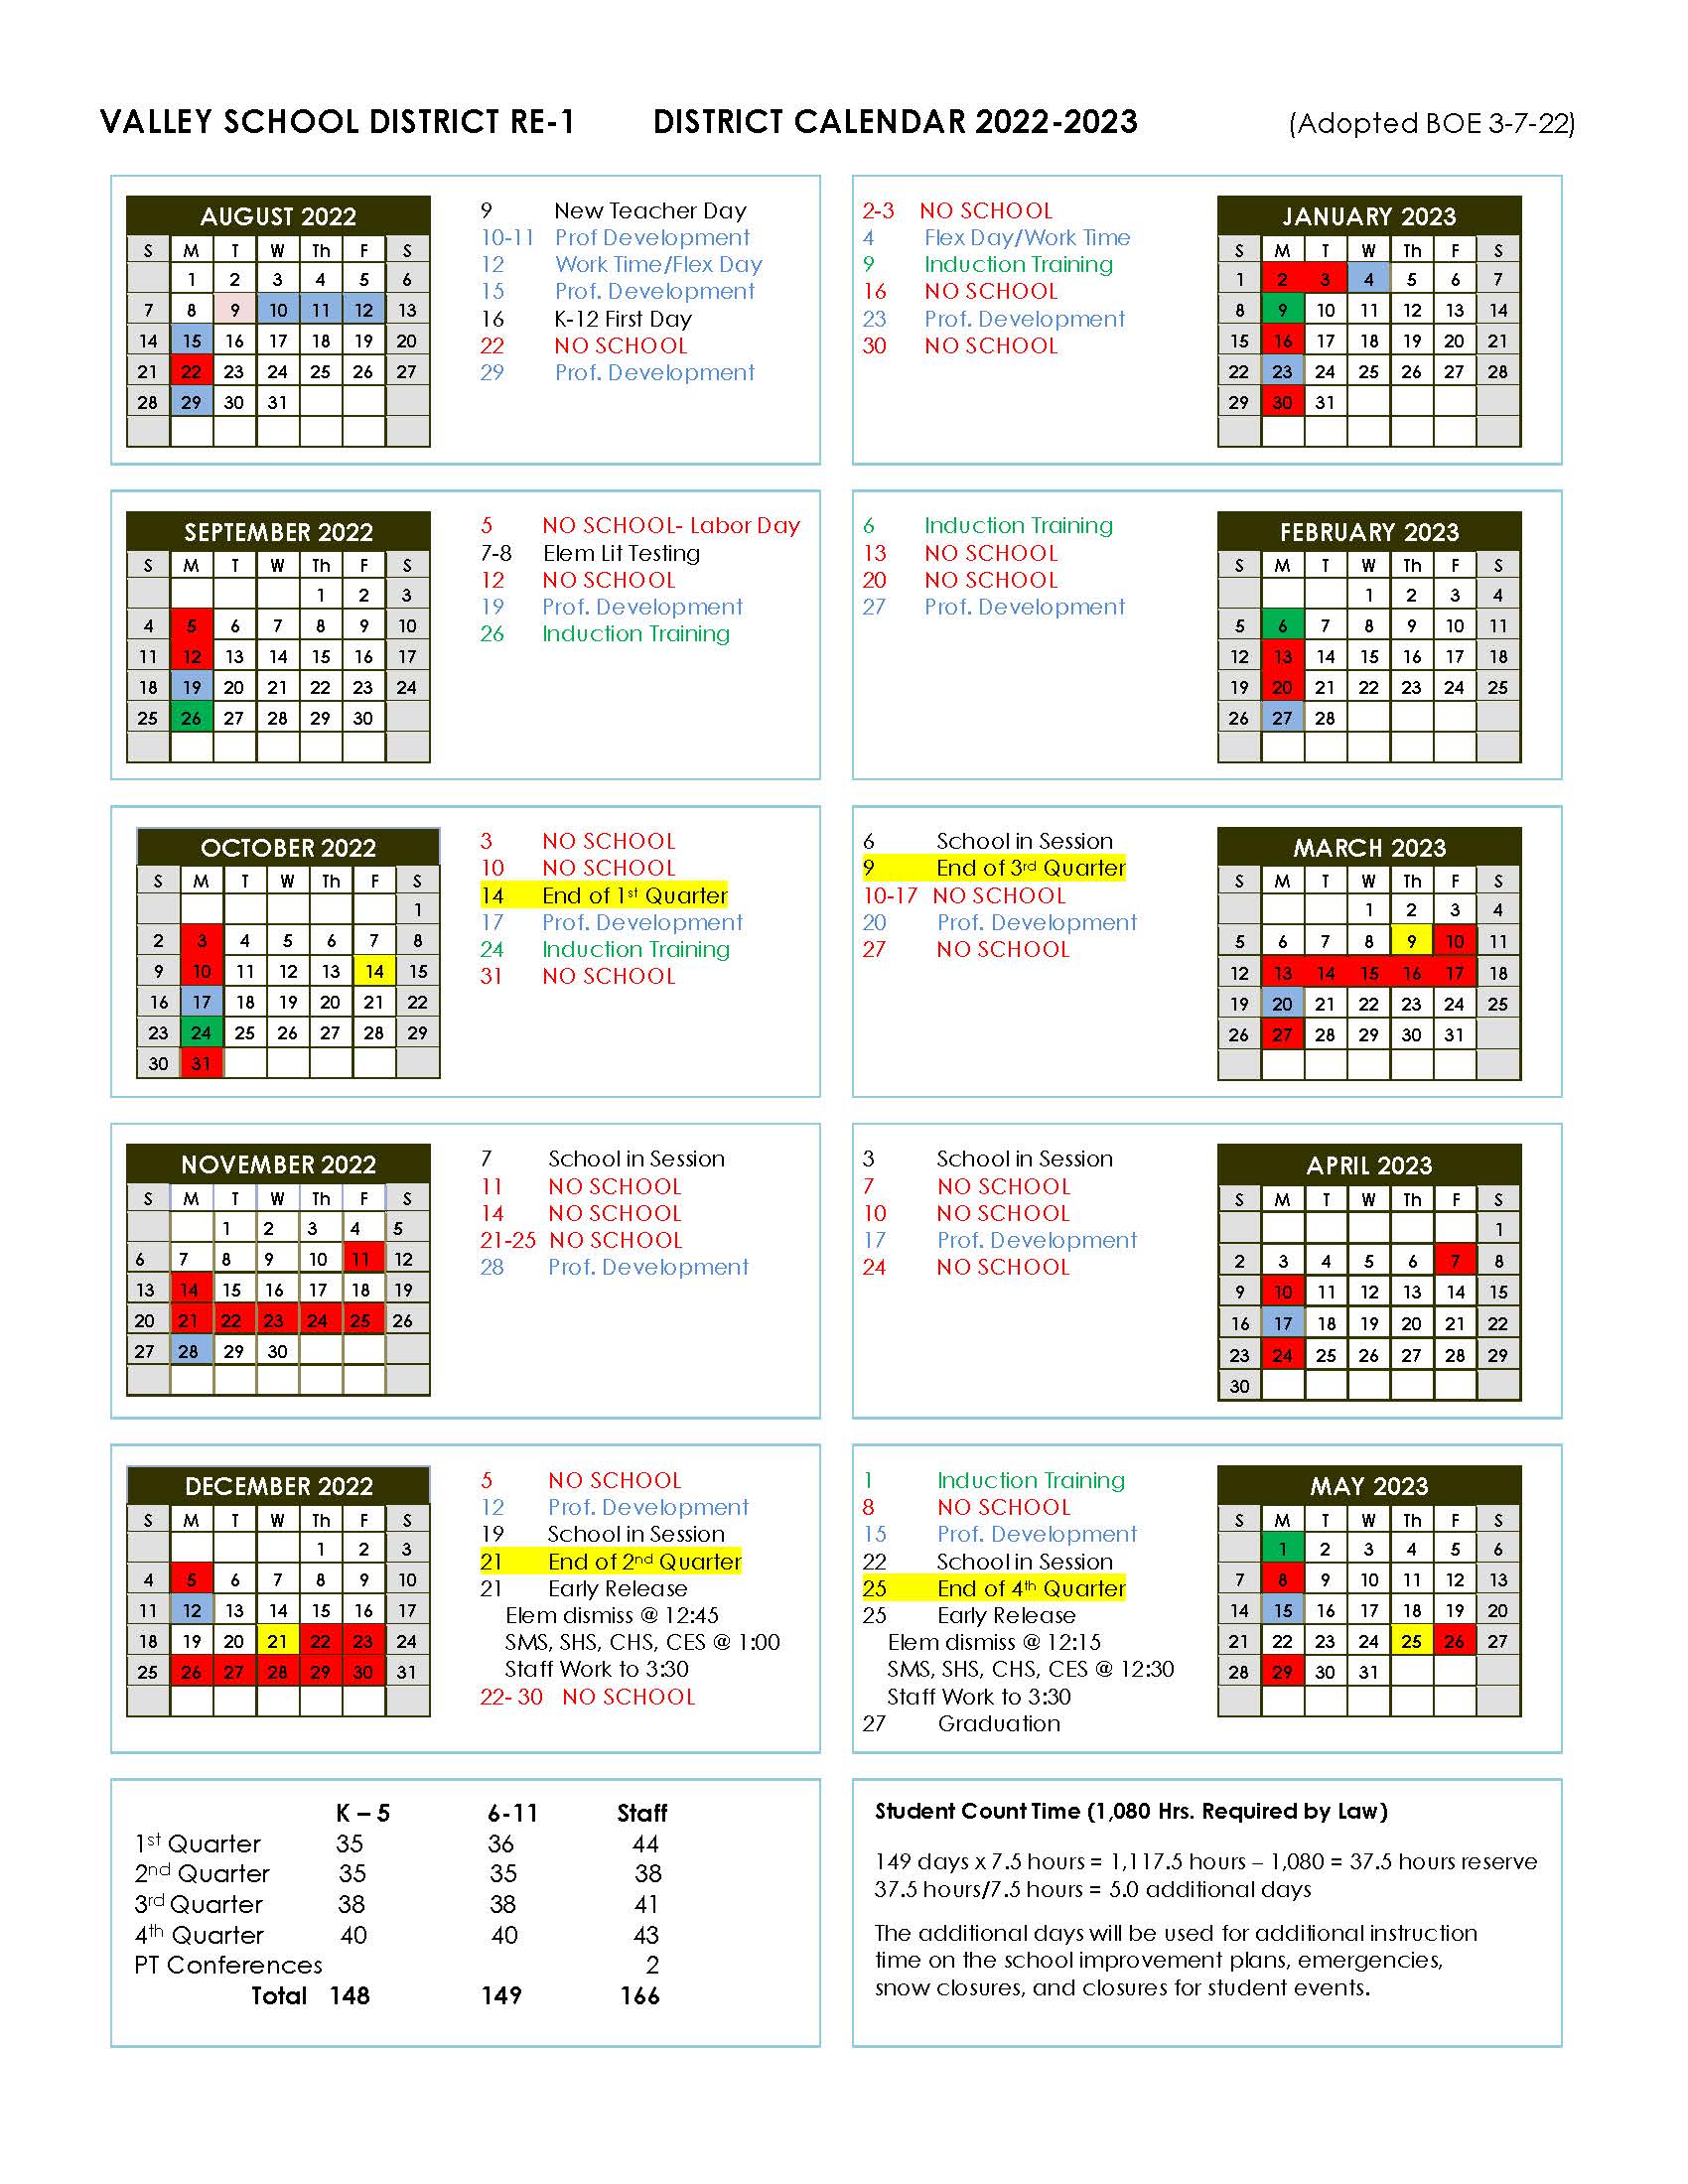 Valley School District RE1 Calendar 2022 and 2023